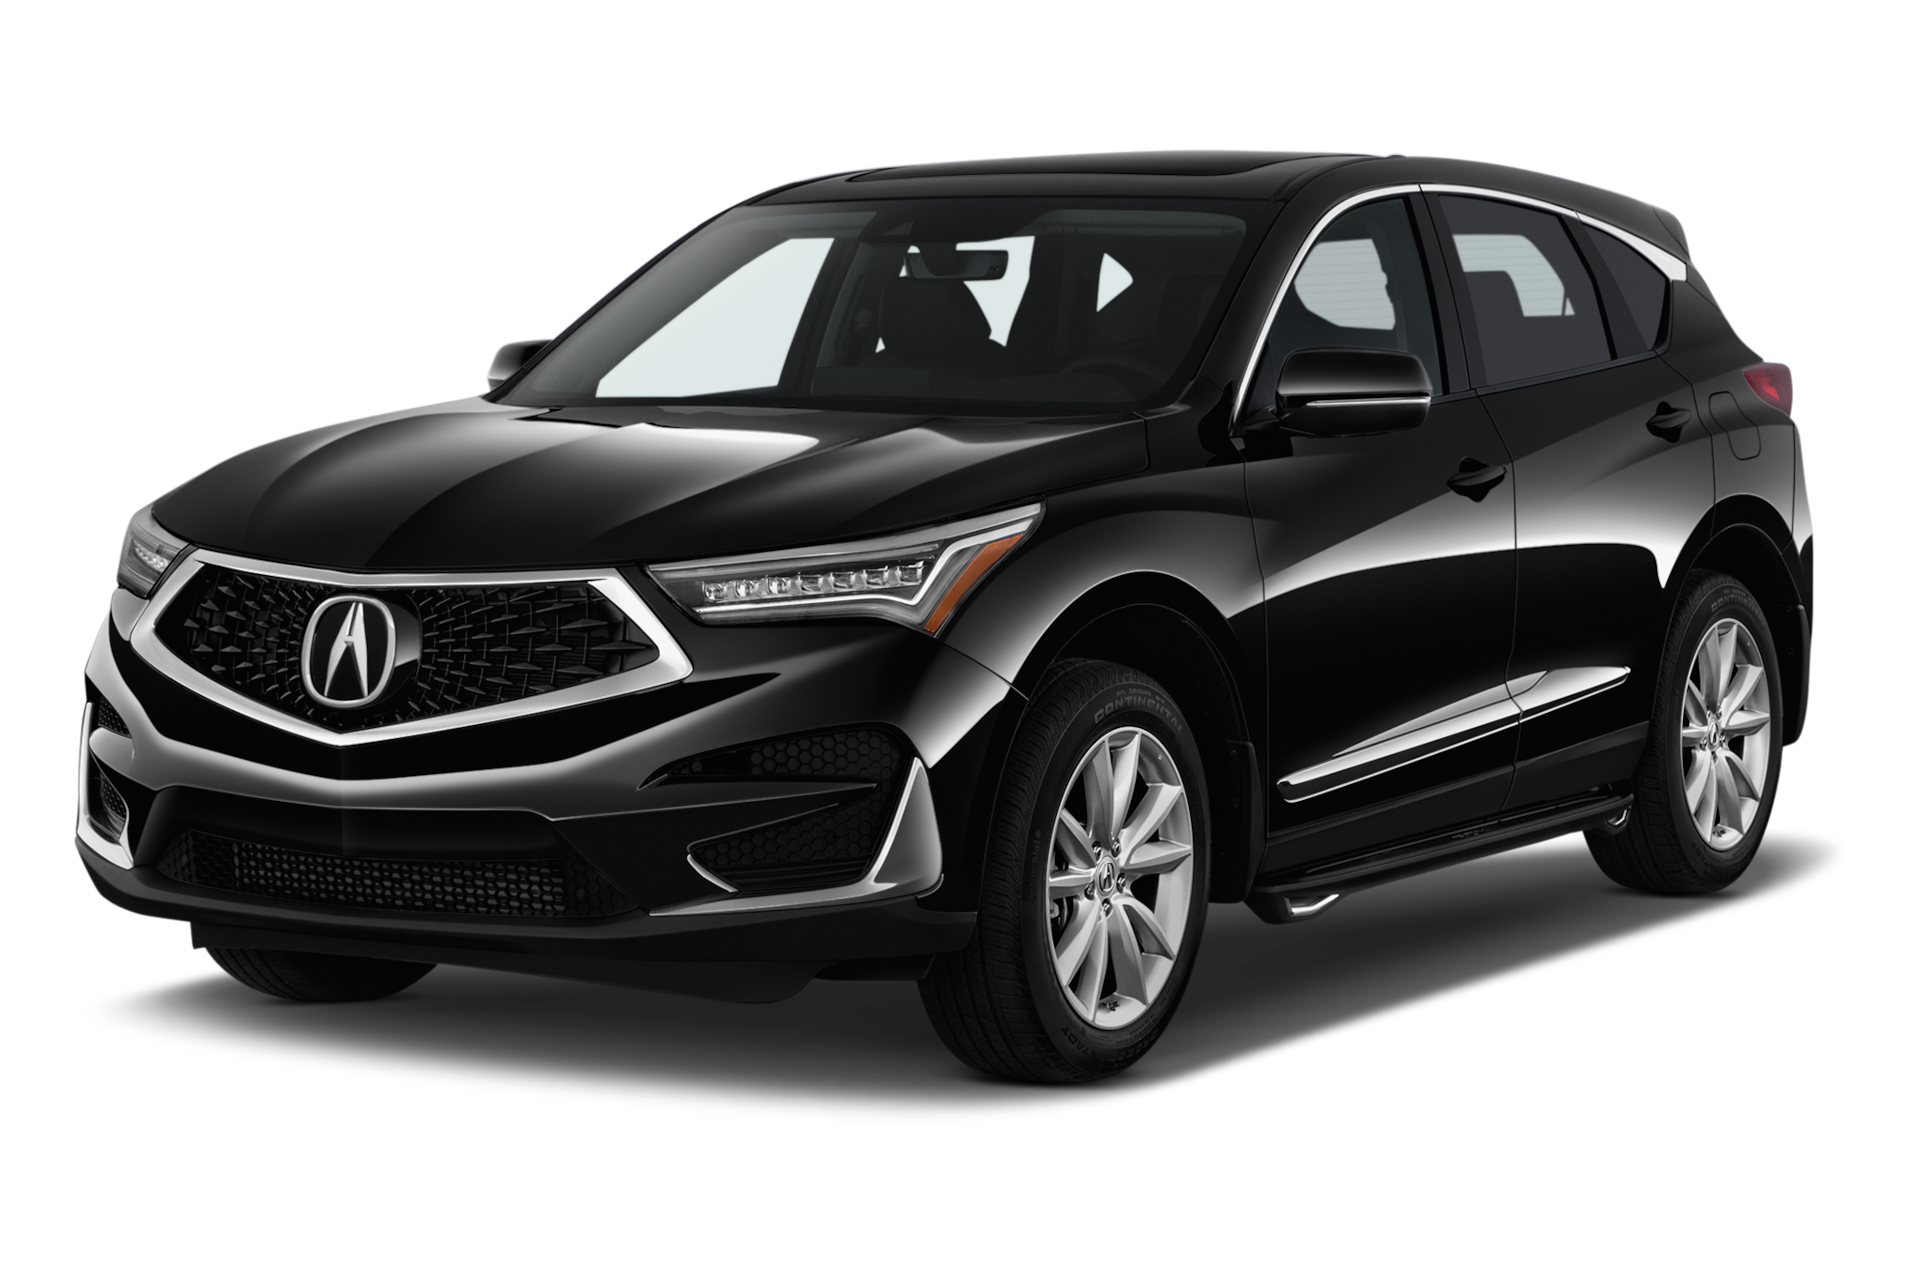 2020 Acura RDX Prices, Reviews, and Photos - MotorTrend